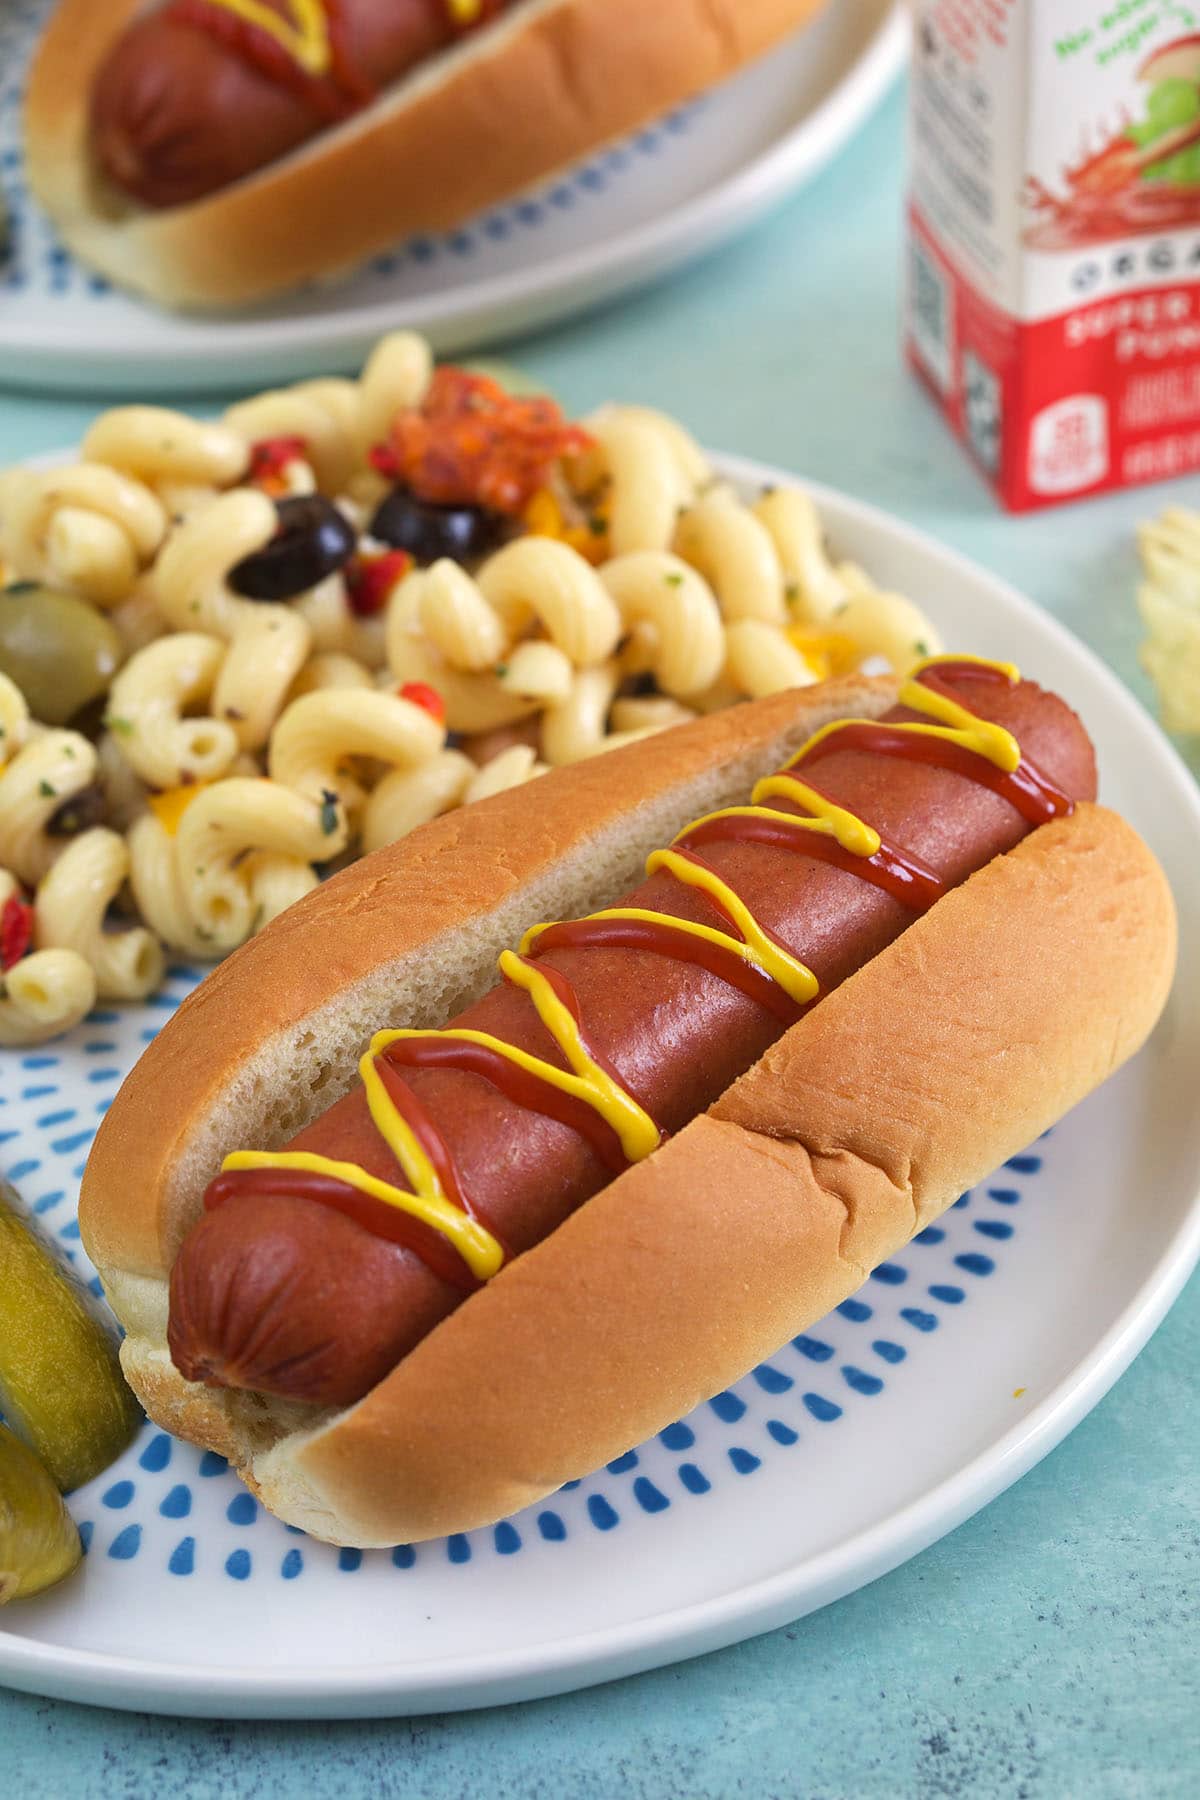 A hot dog is drizzled with ketchup and mustard.